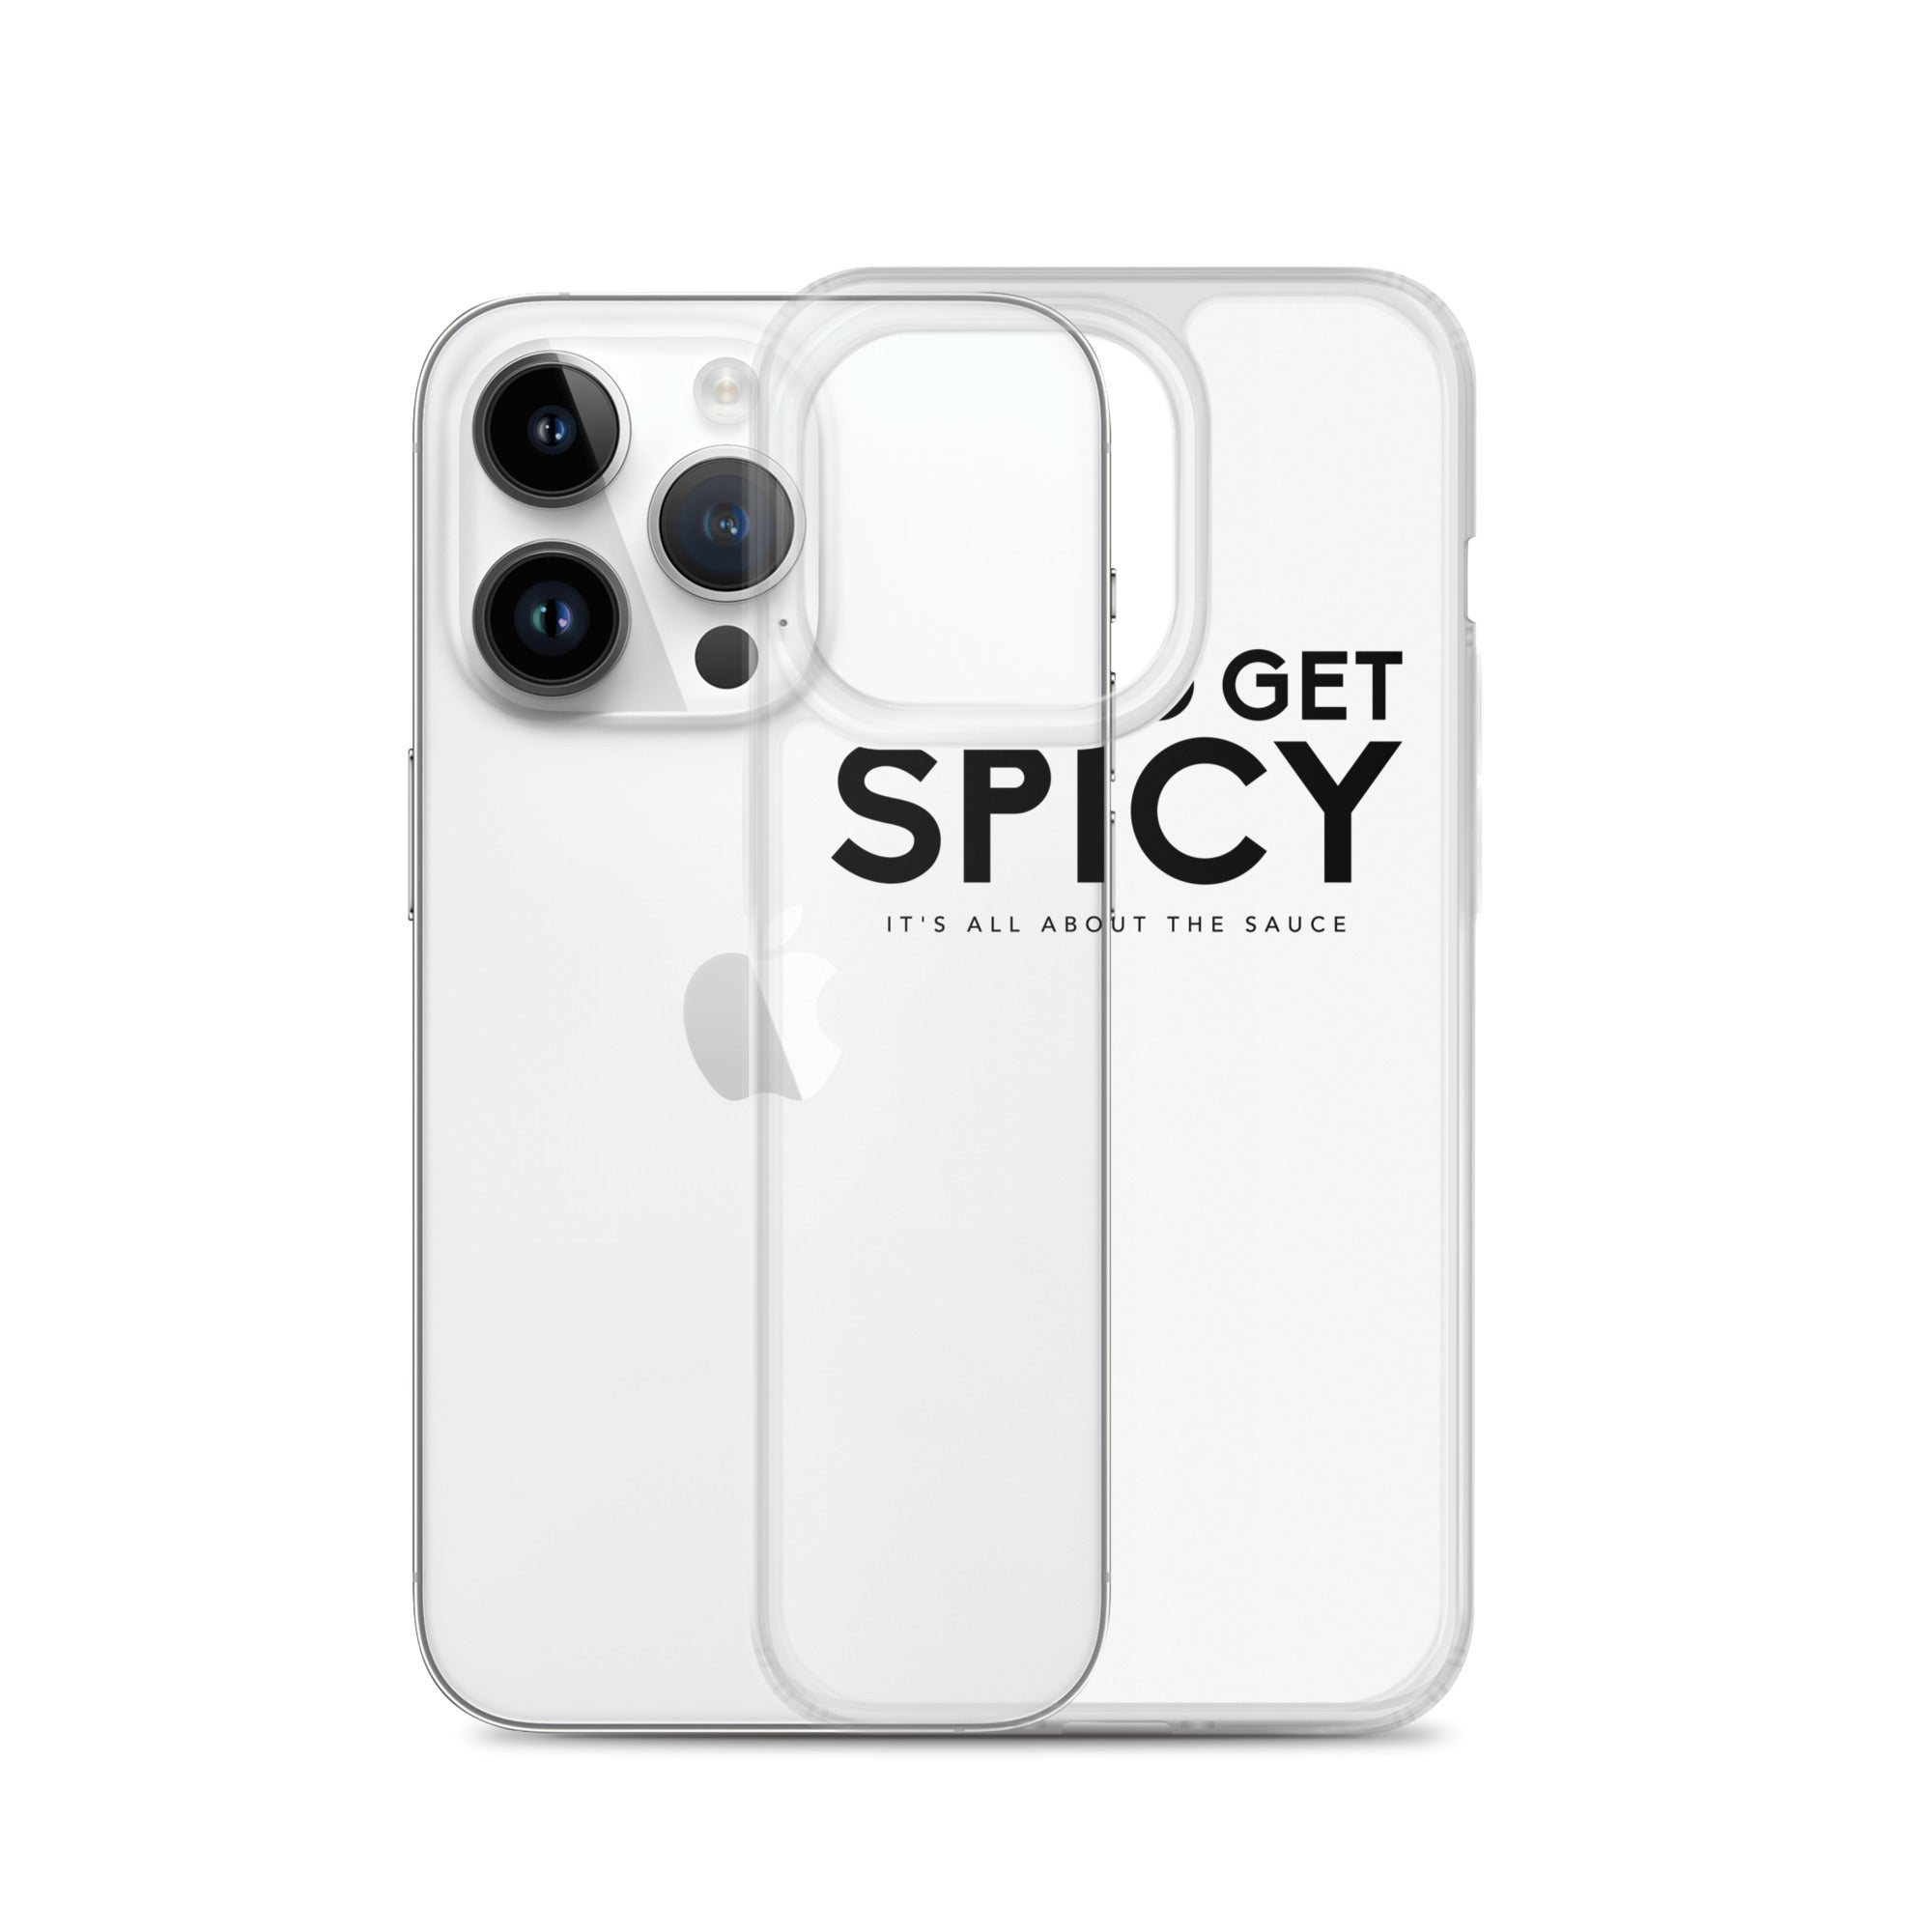 Time To Get Spicy - Clear Case for iPhone®